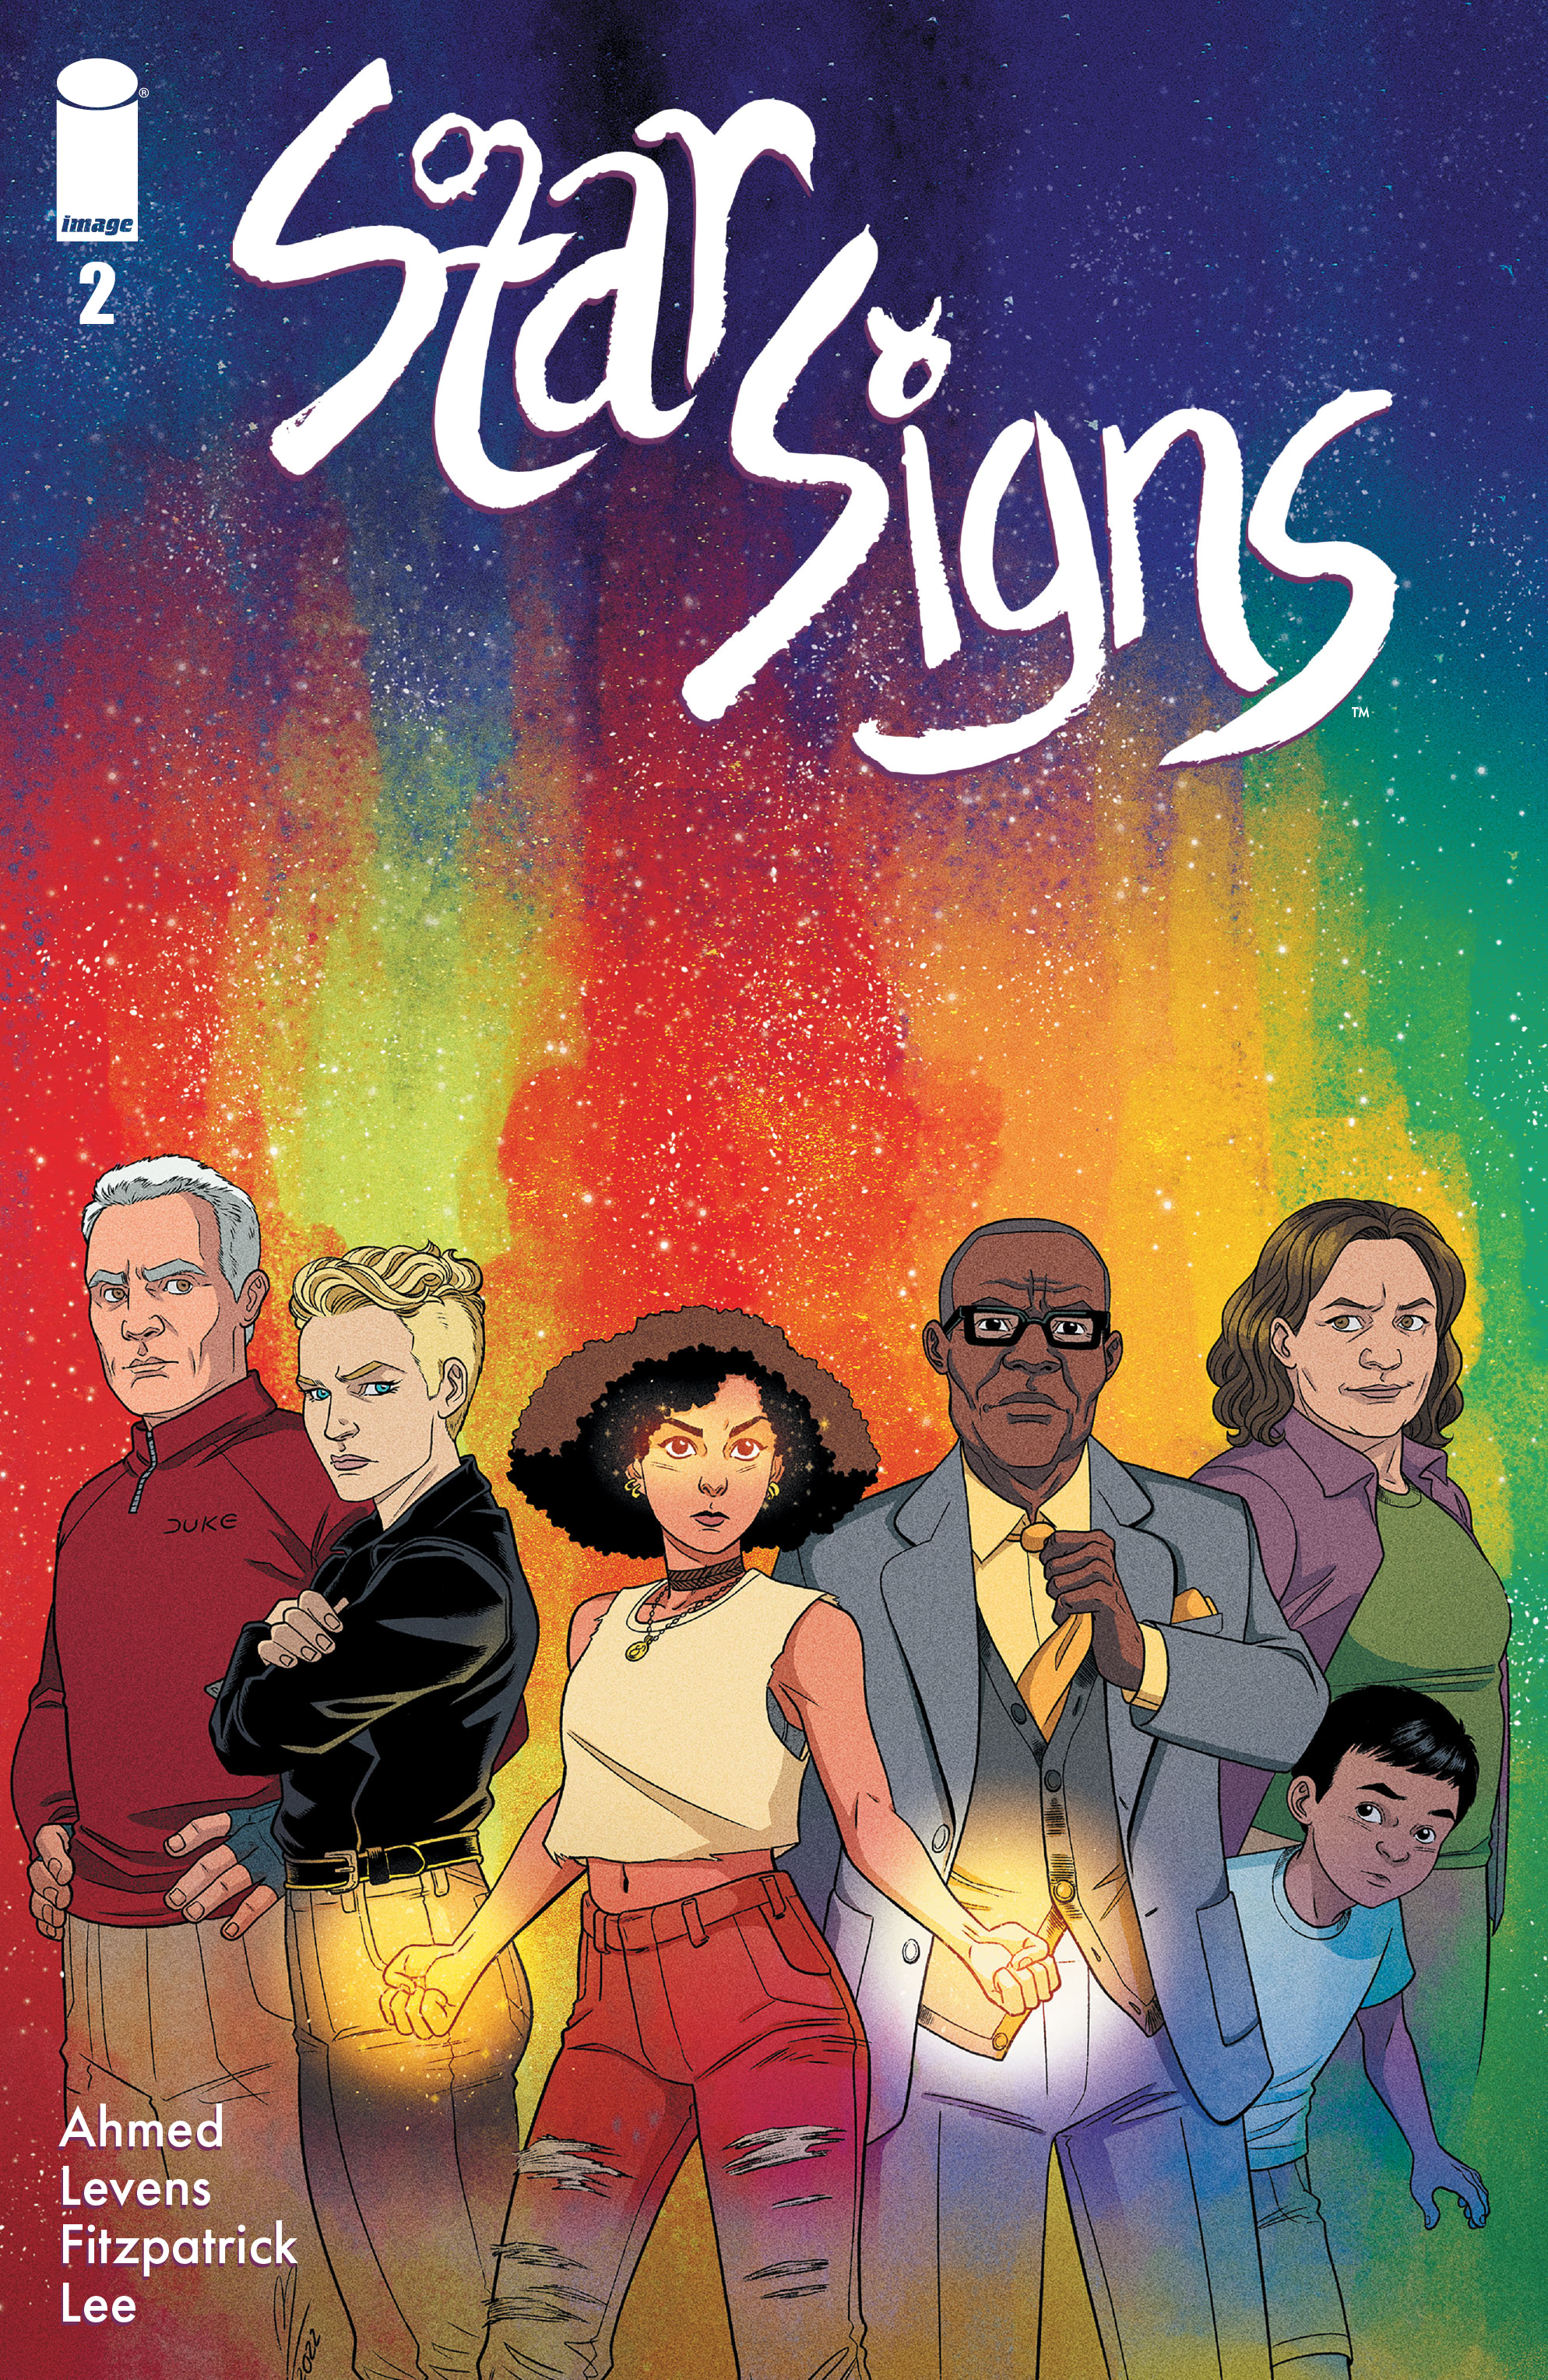 Read online Starsigns comic -  Issue #2 - 1